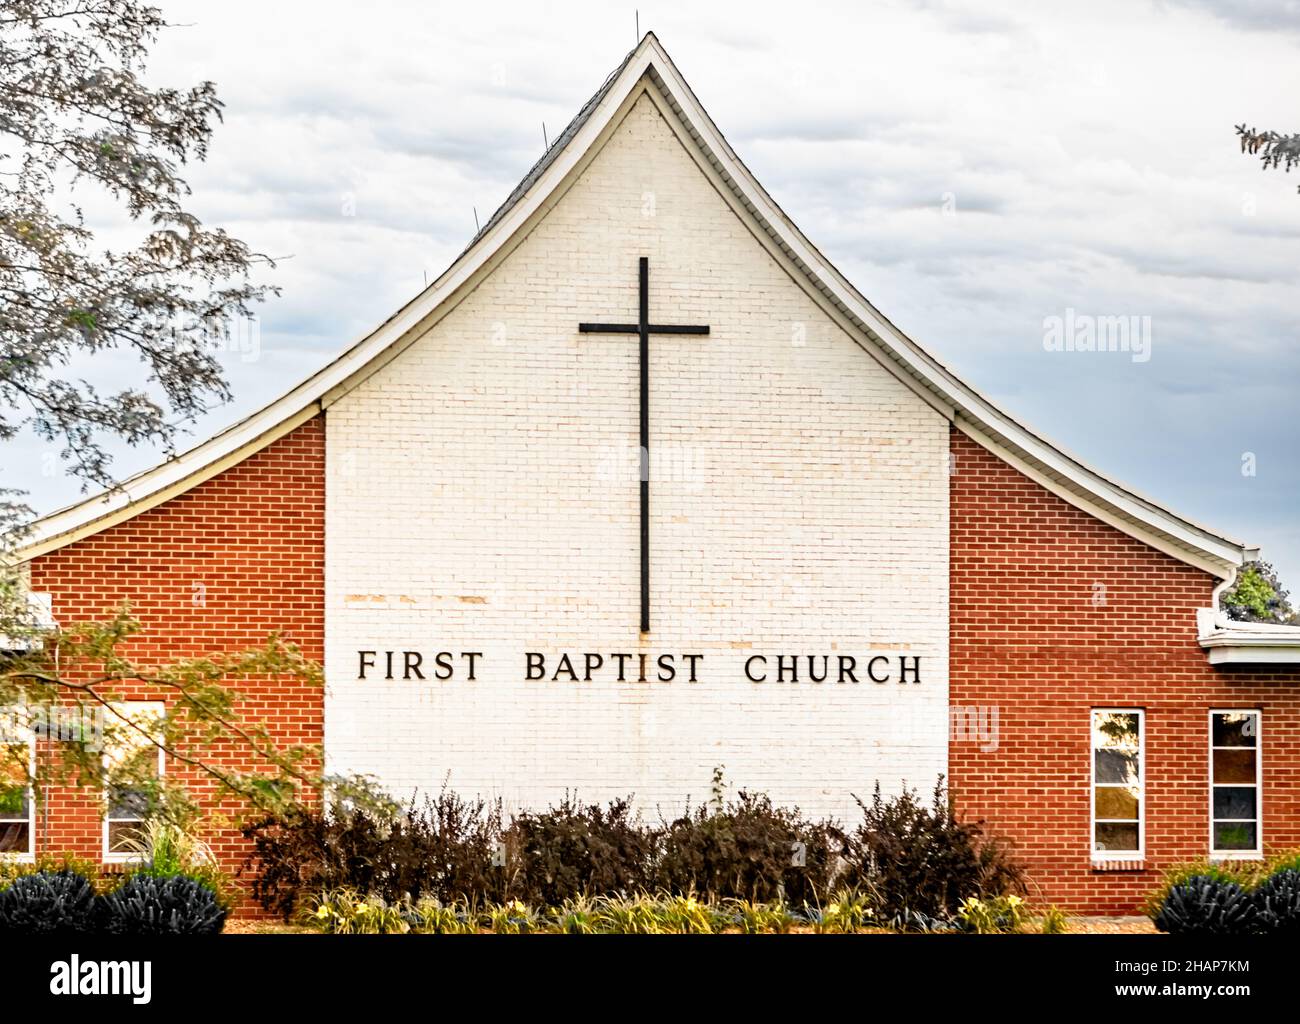 First Baptist church building with large cross, and colors of cream and red brick. Stock Photo